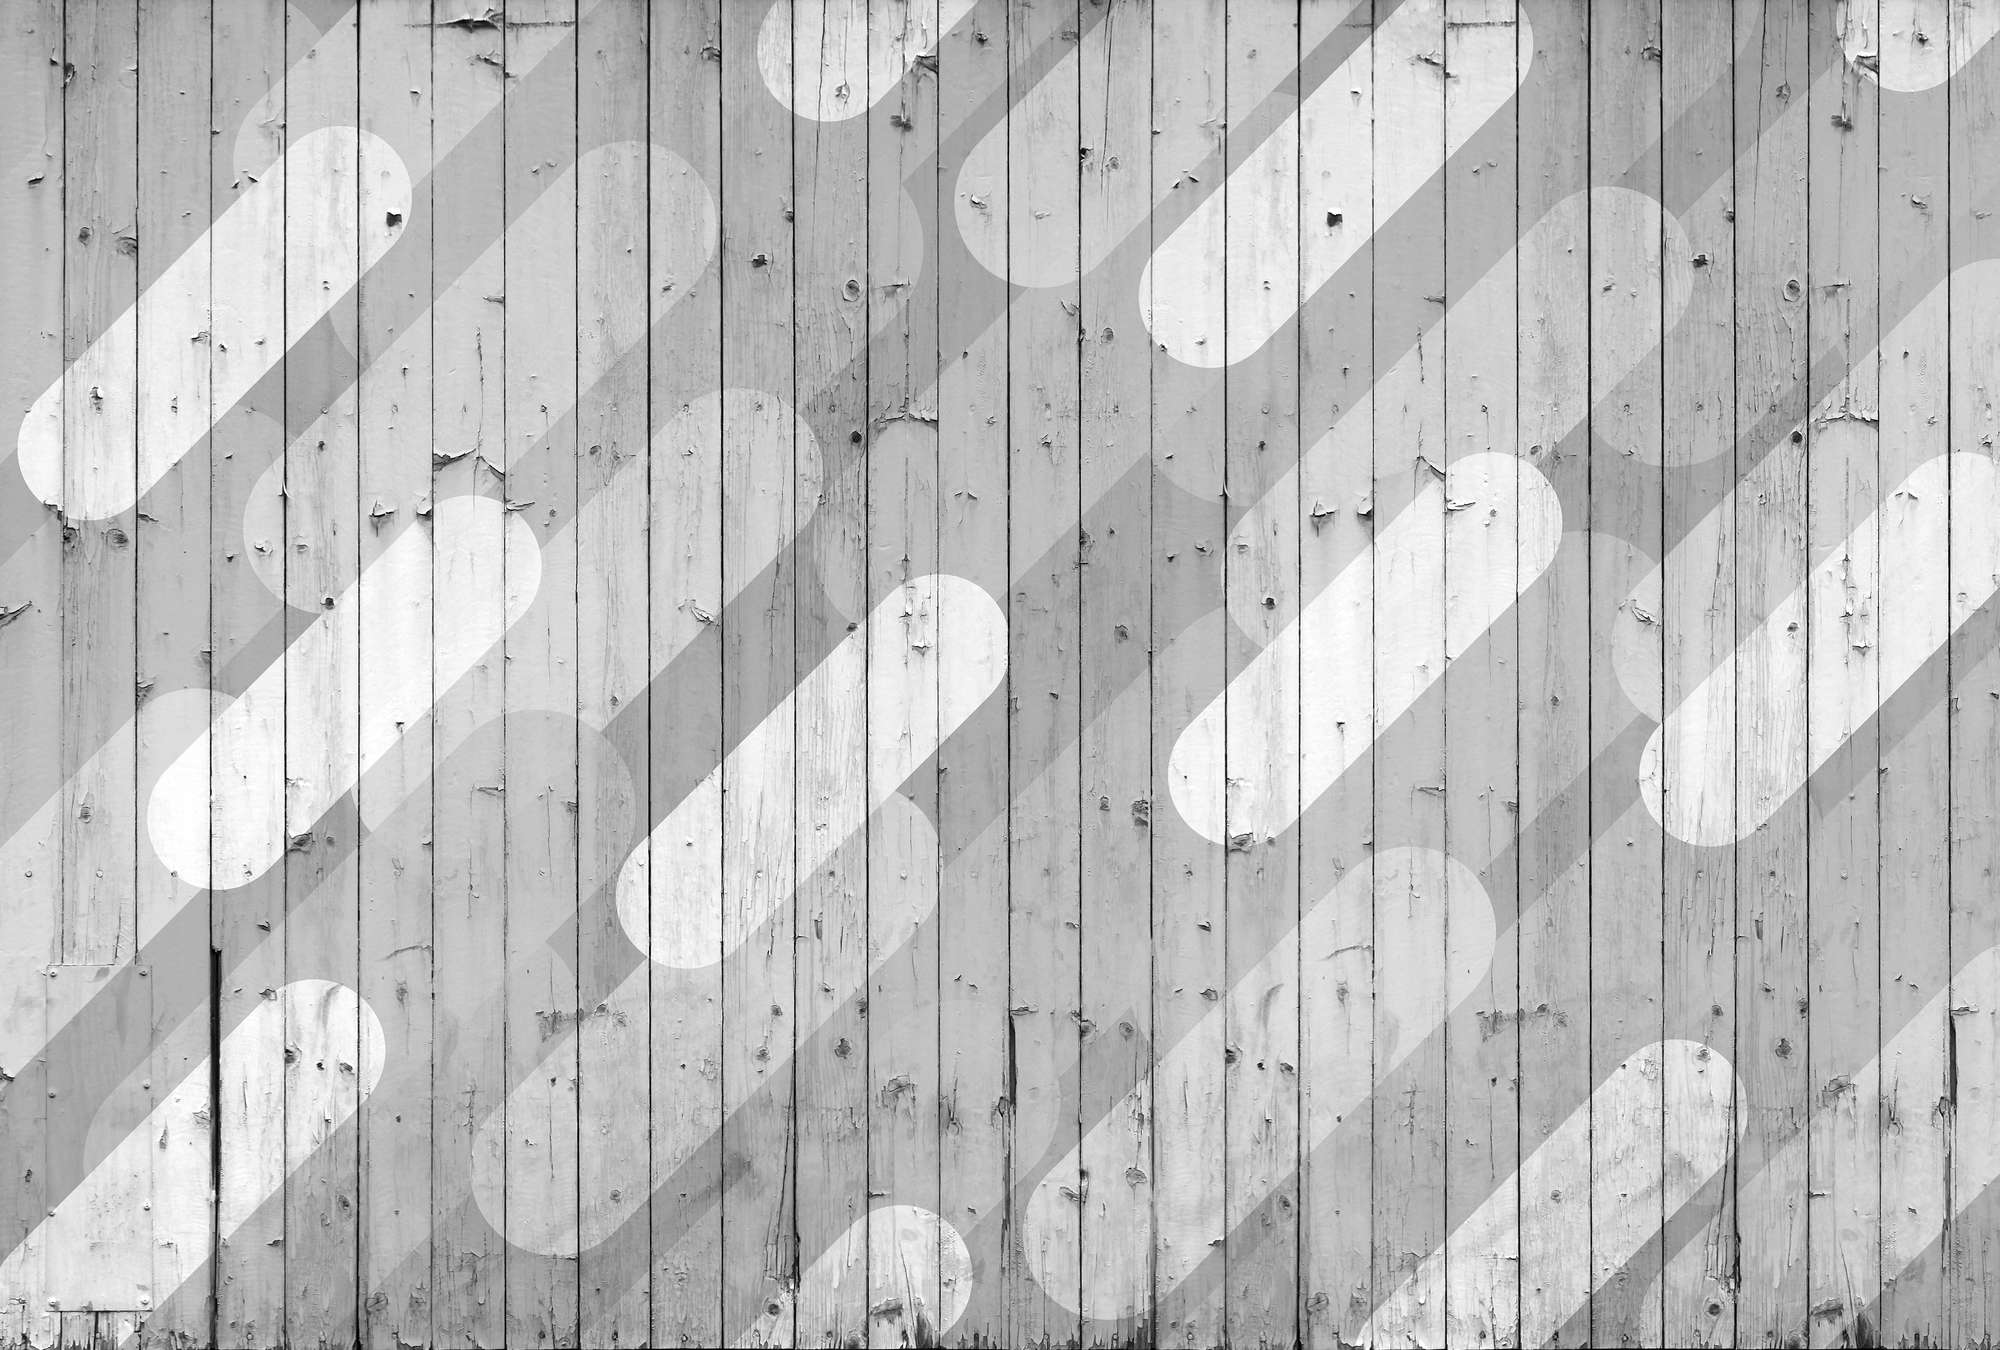             Wood mural with boards & stripes pattern - grey, white
        